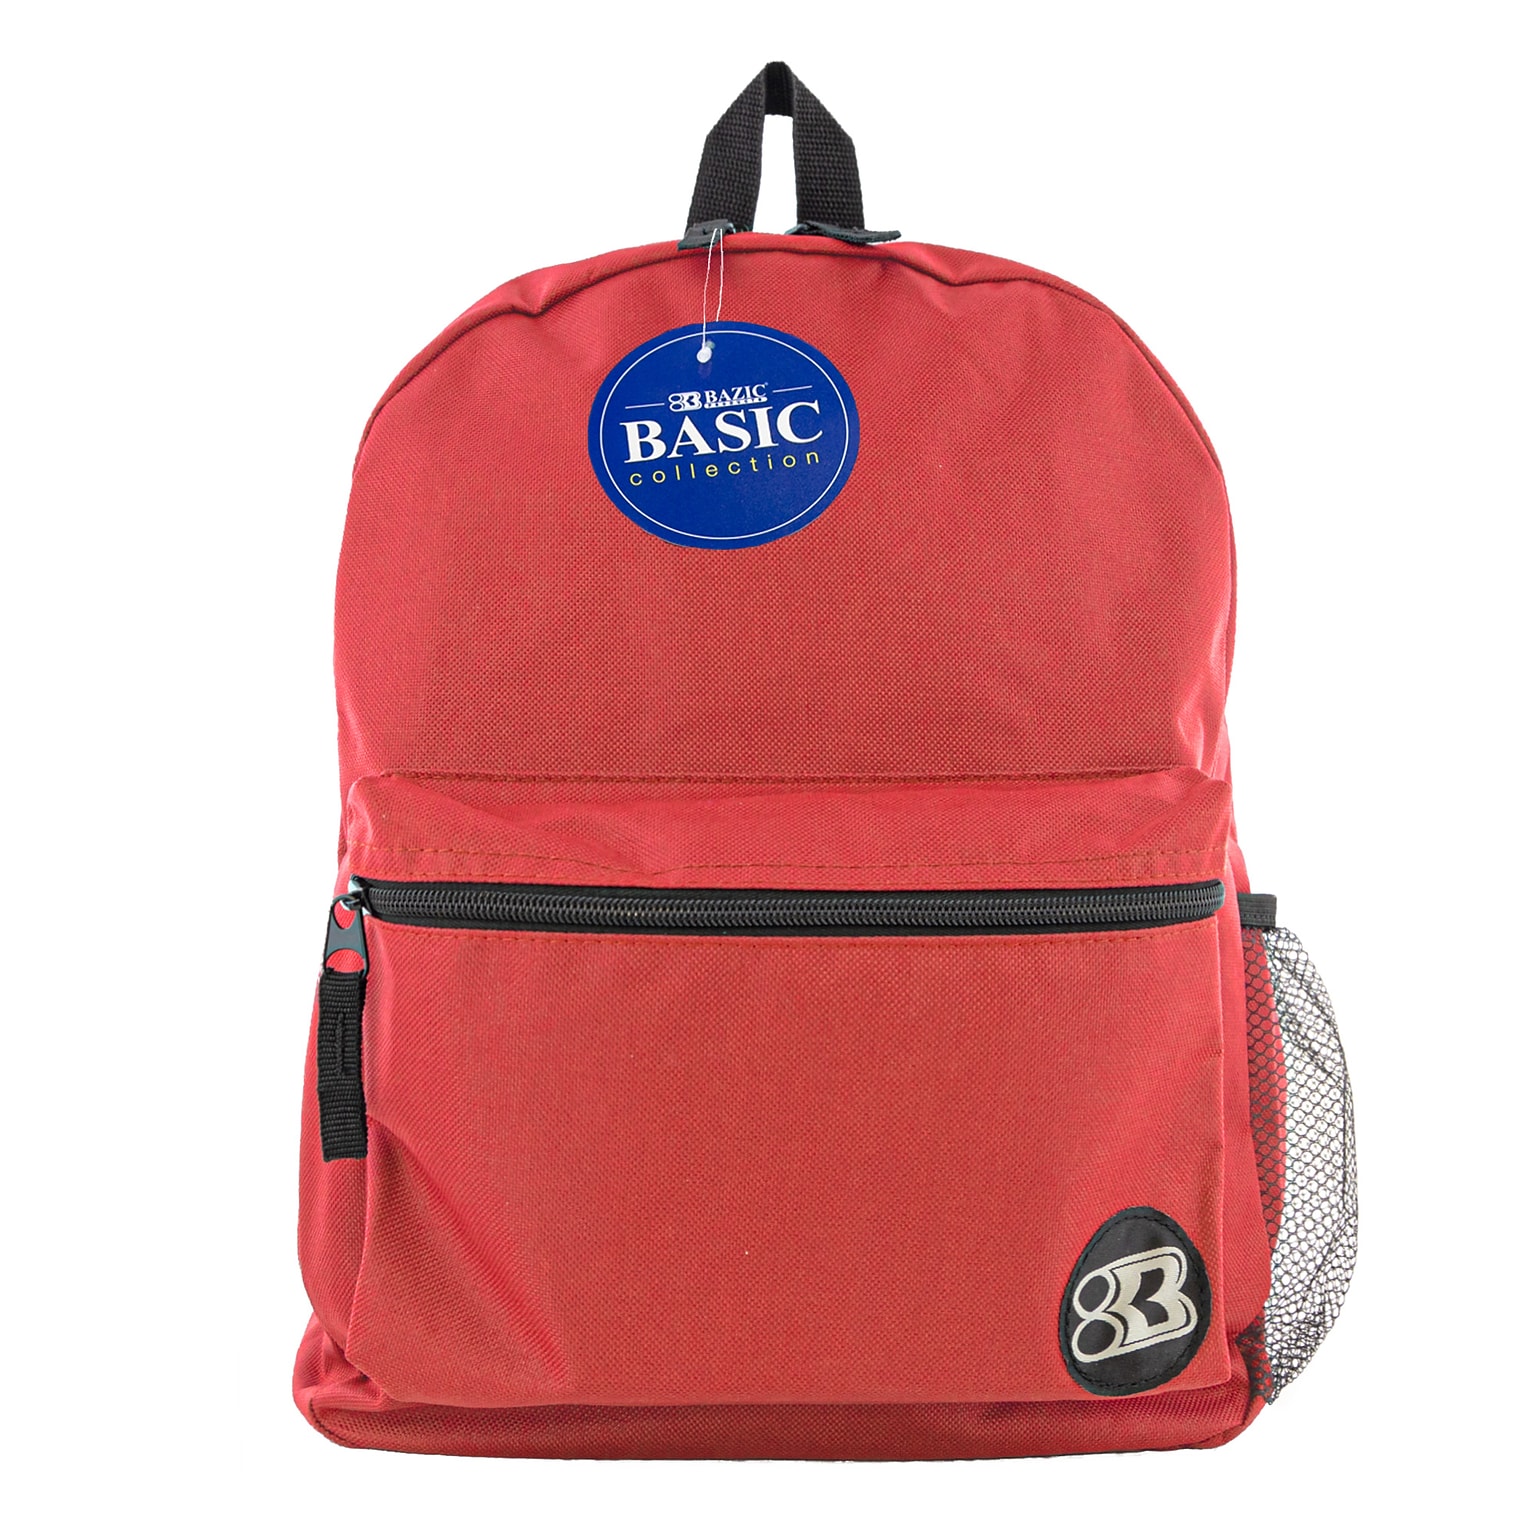 BAZIC Basic Collection Polyester School Backpack, Solid, Red (BAZ1032)